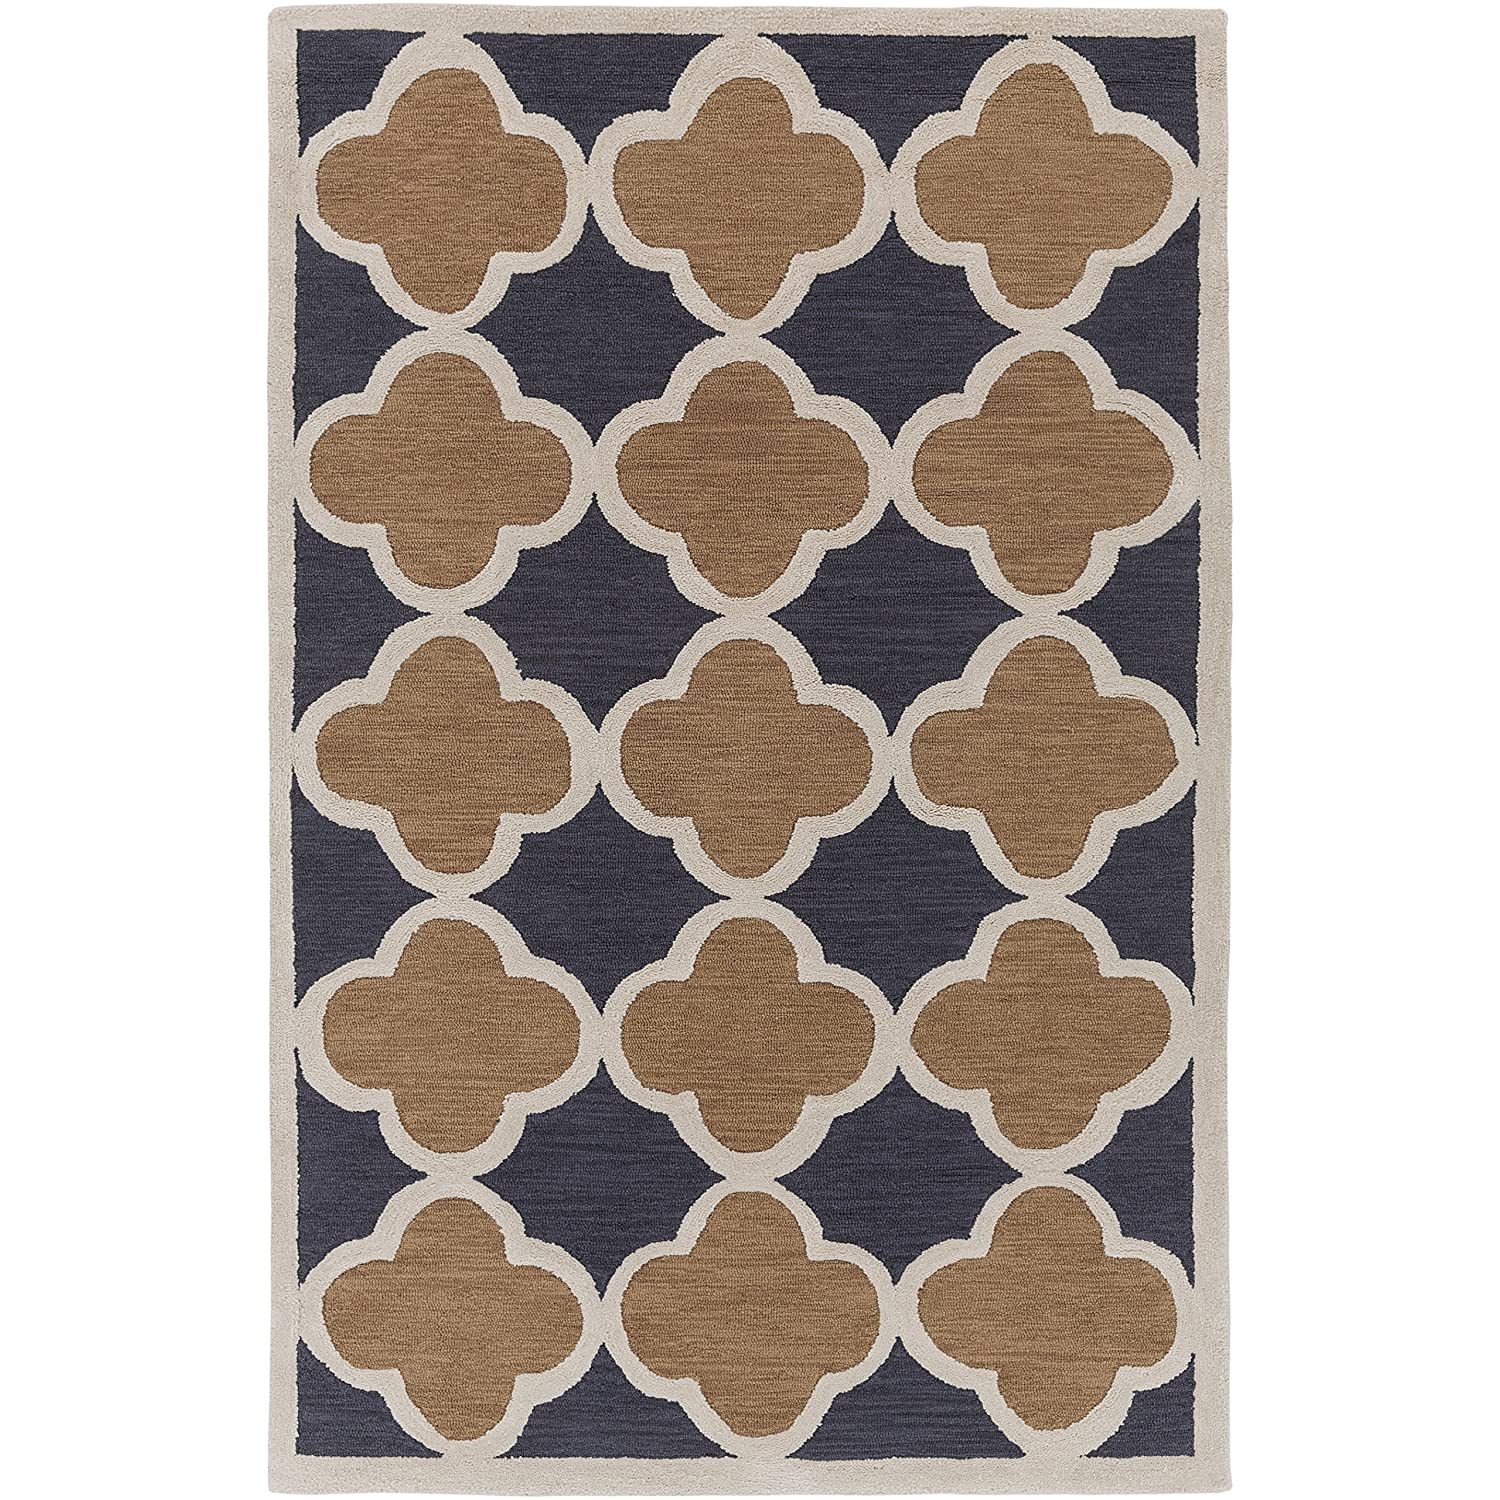 Primary image for Holden Maisie Rug, 5' X 7'6"..